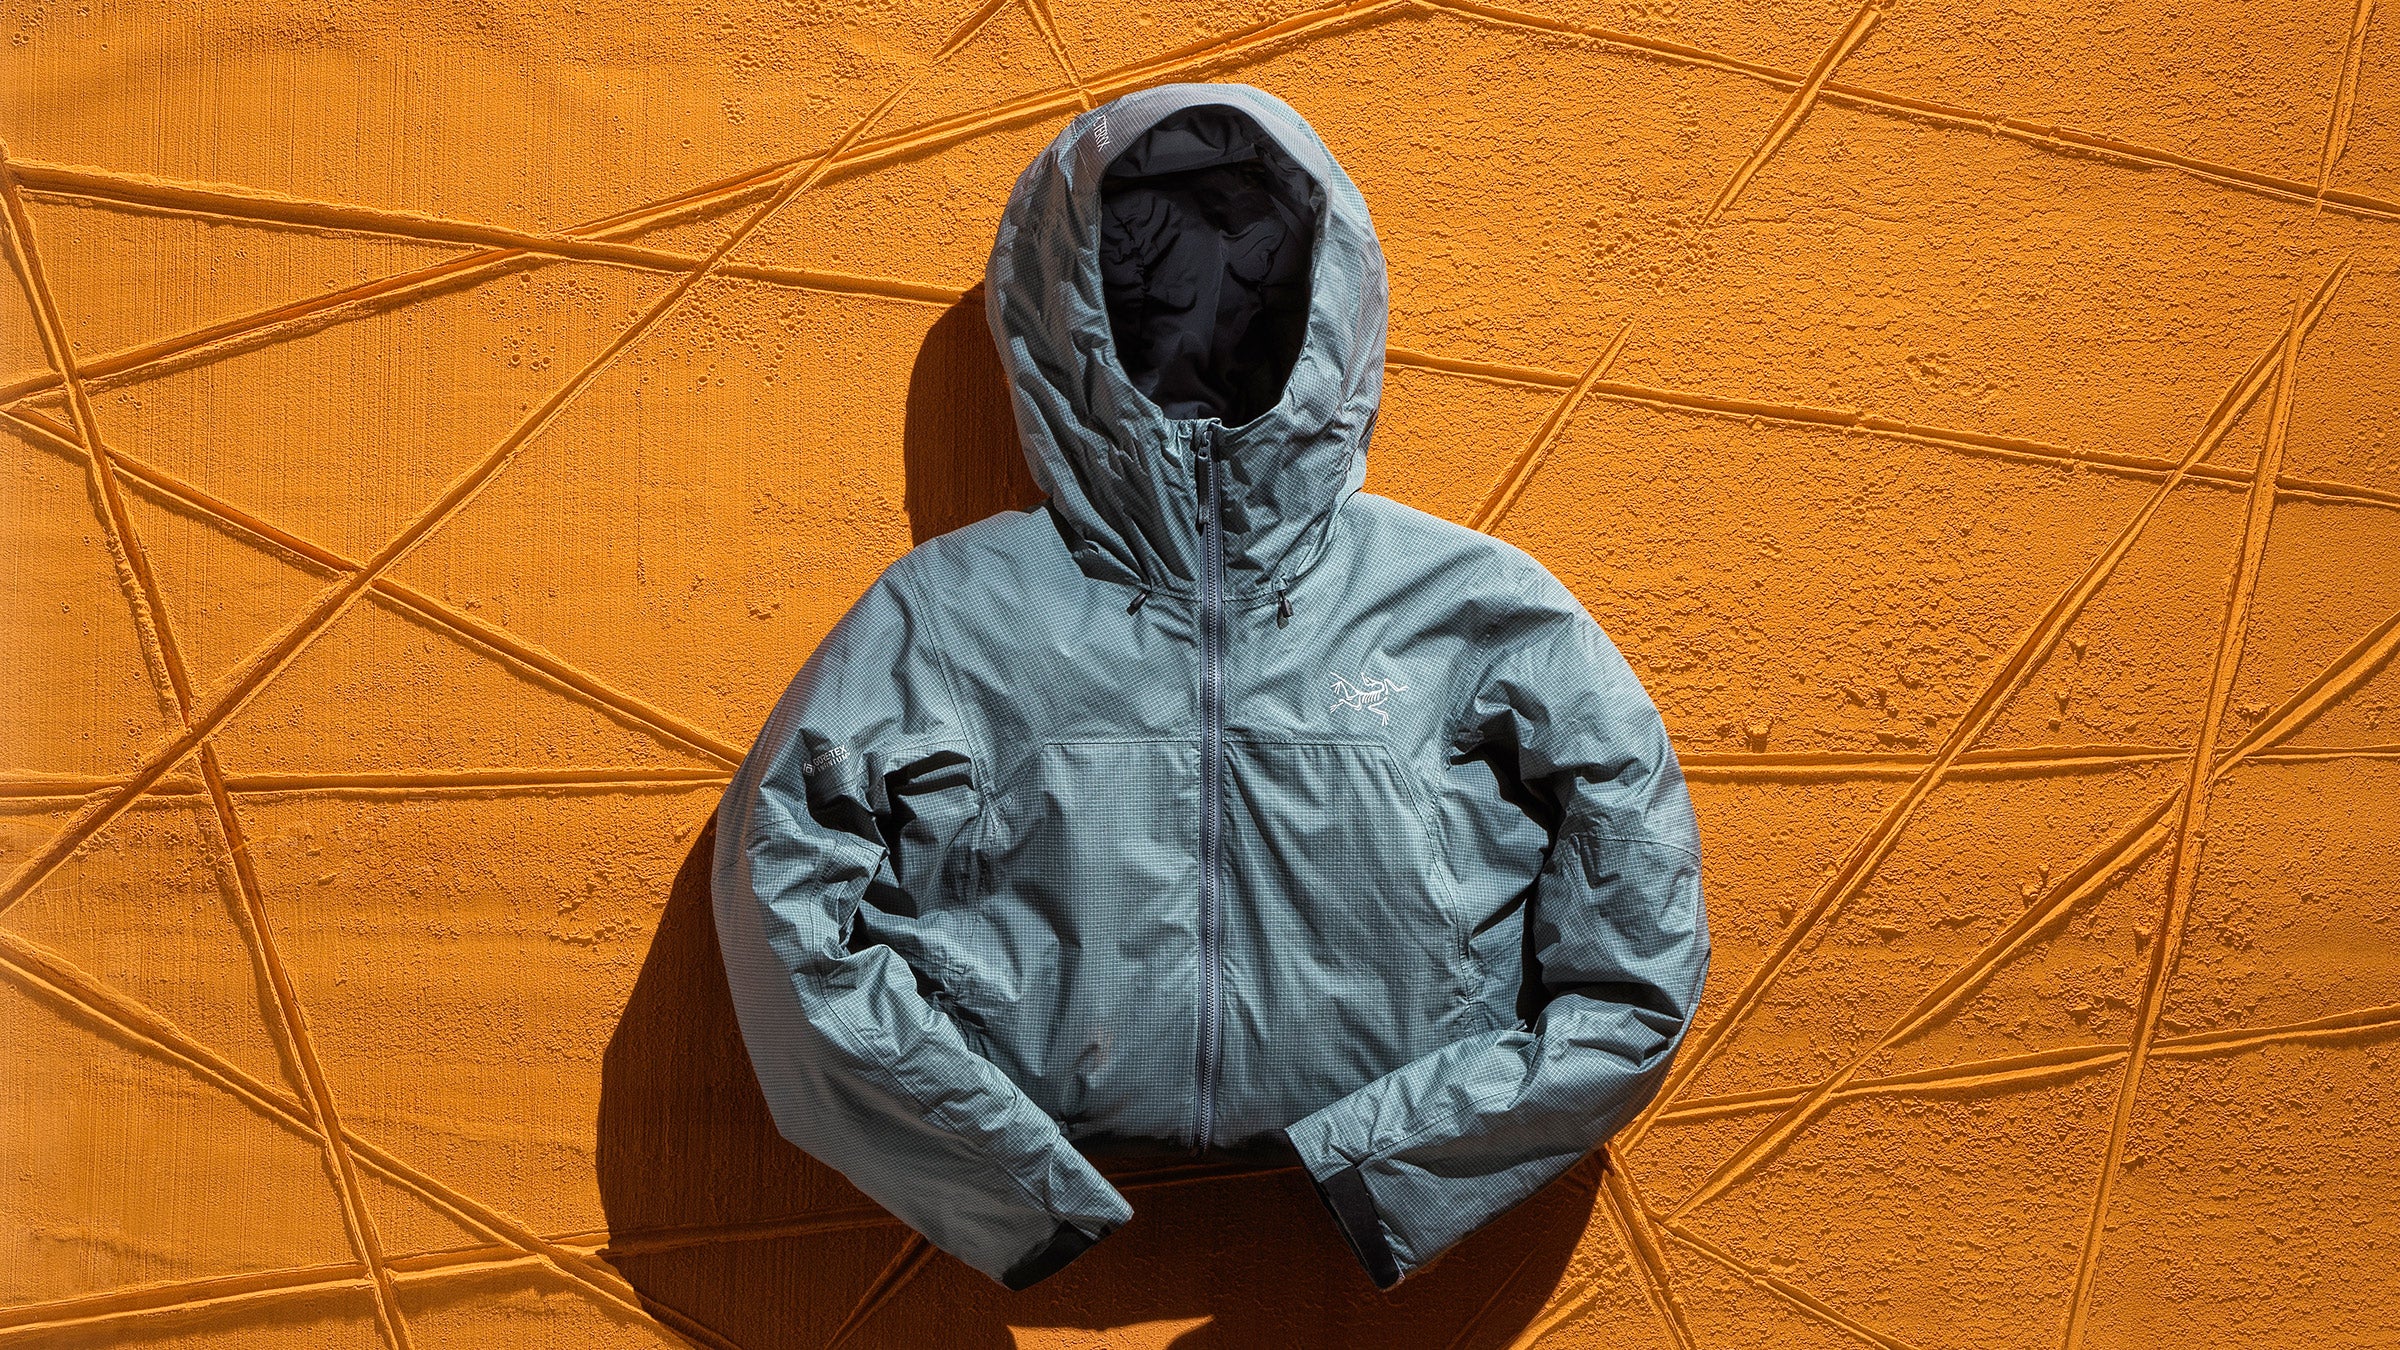 Arc'teryx Rush Insulated Jacket: Test and Review - Outside Online